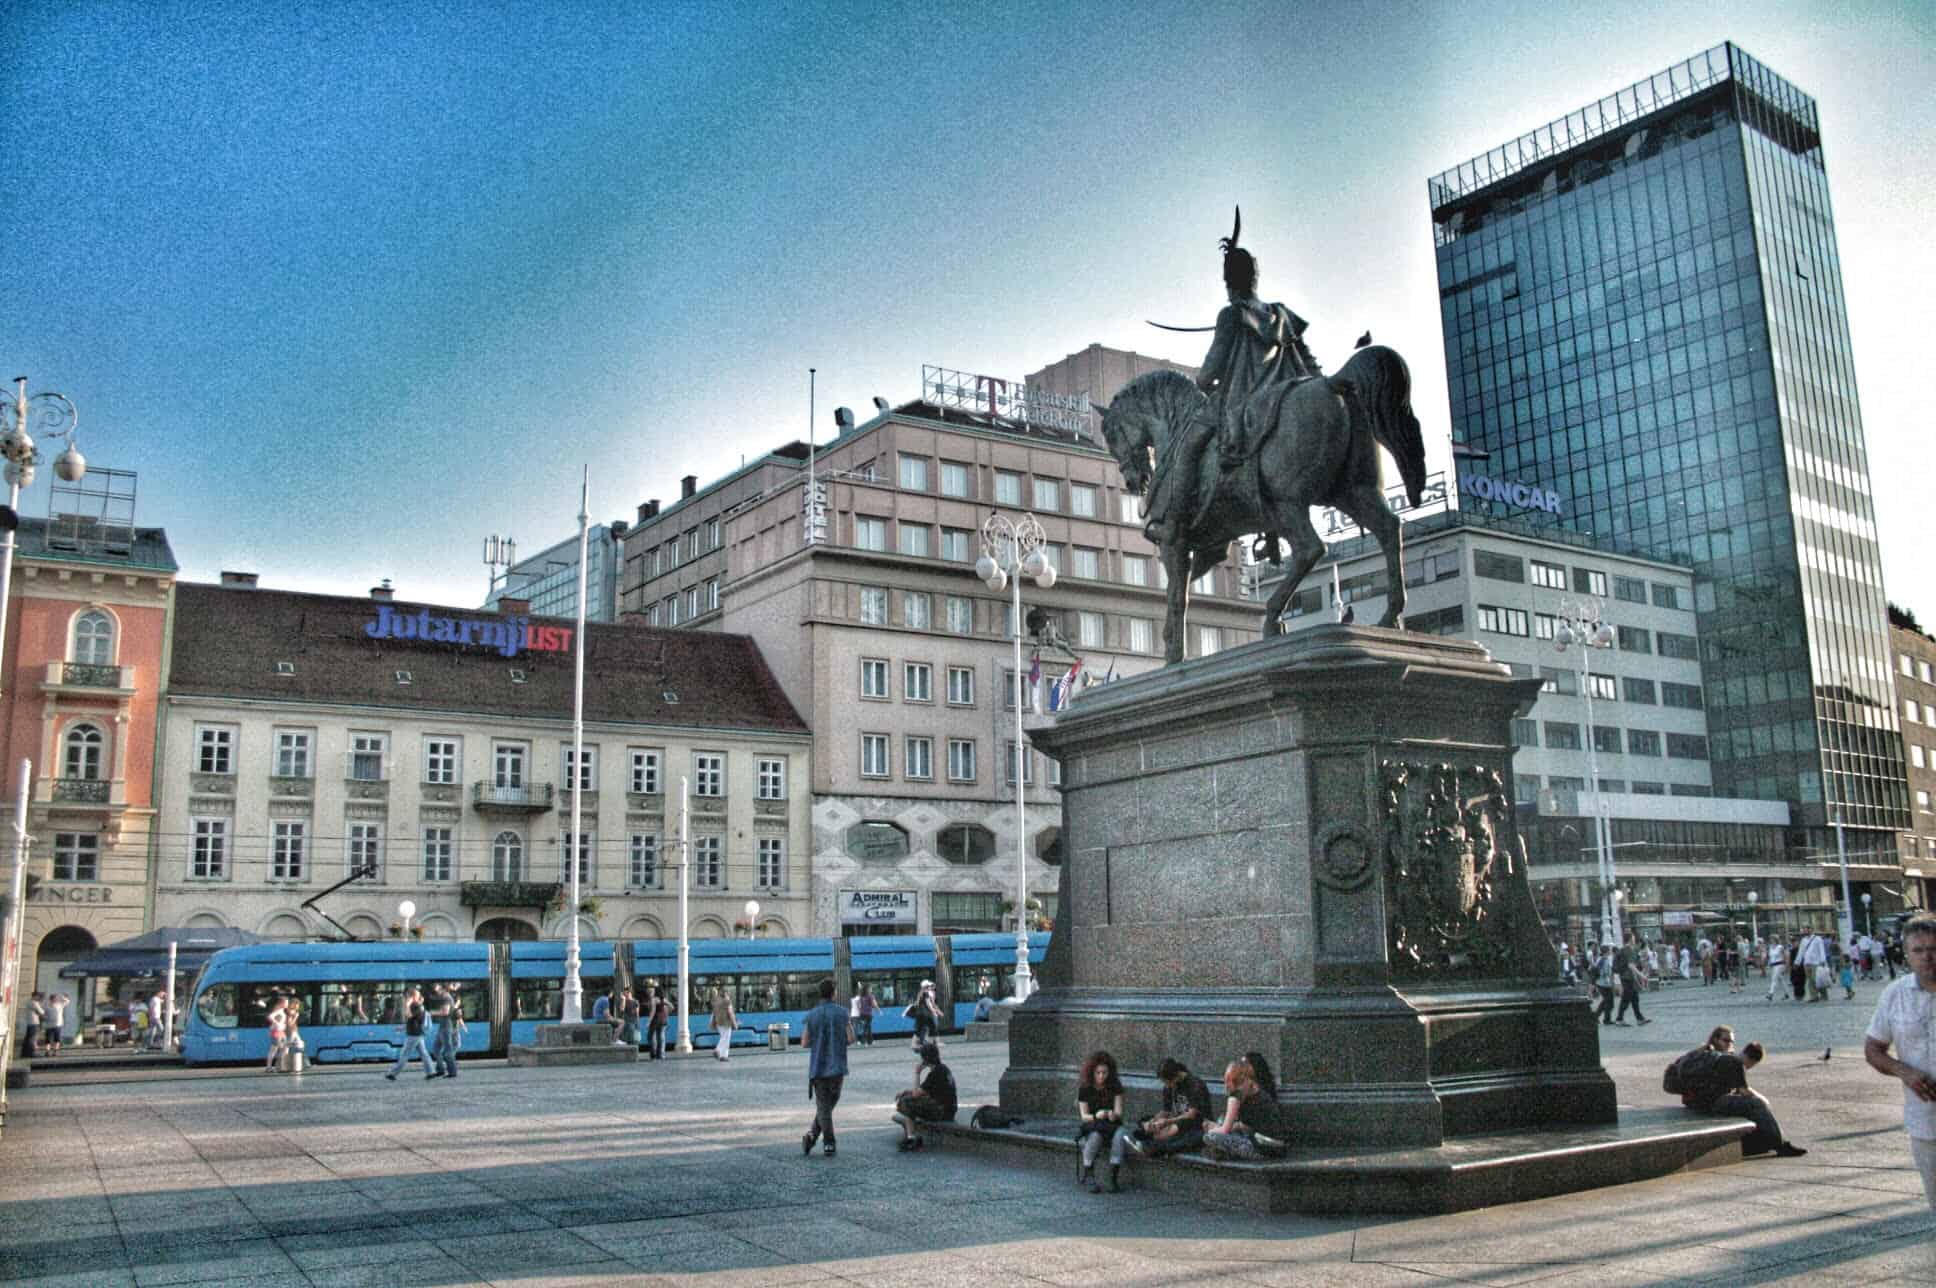 Sightseeing in Zagreb - Trg Ban Jelacic